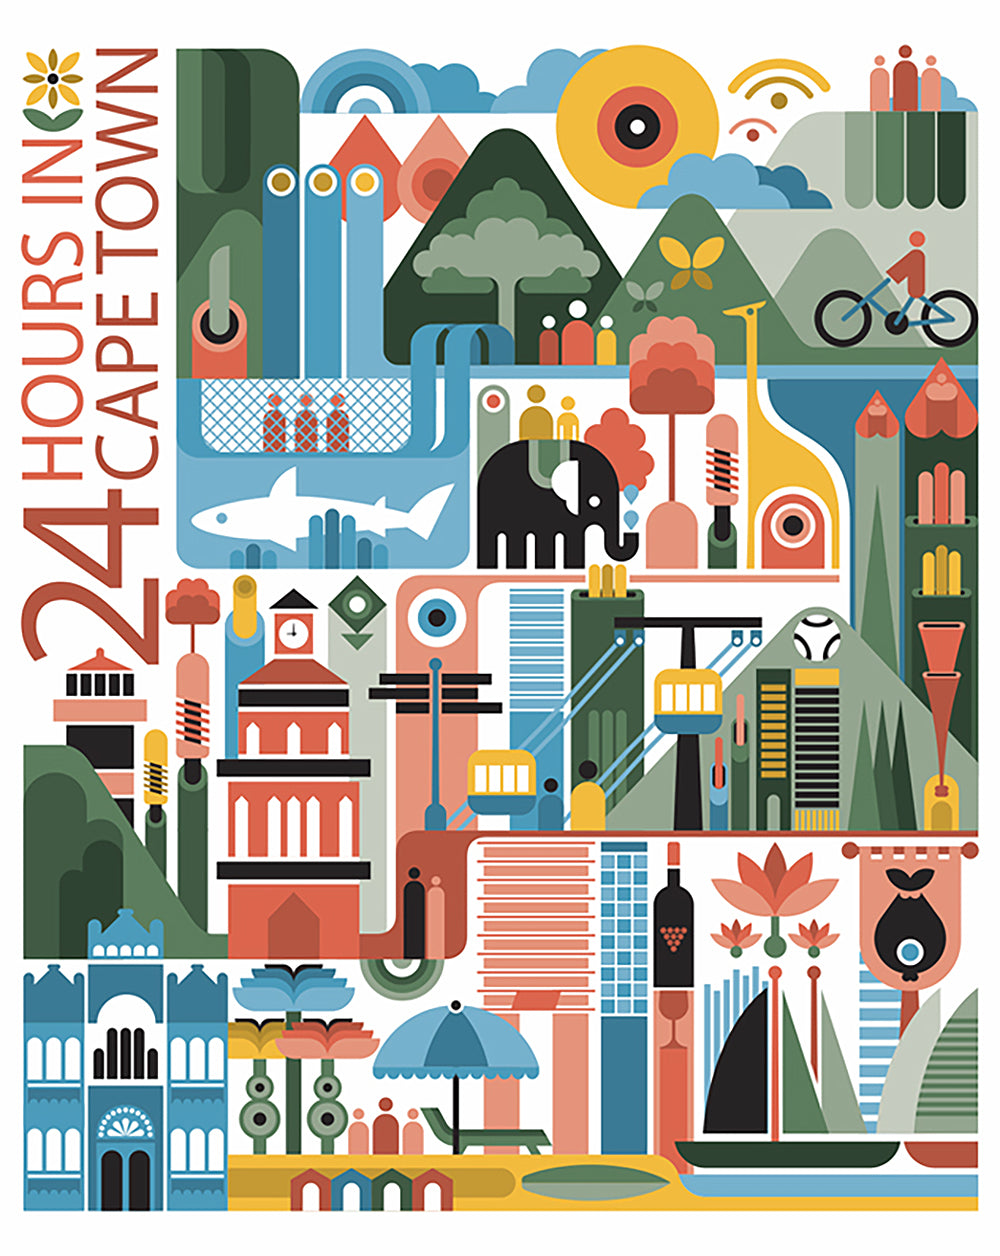 Safari Journal / Blog by Safari Fusion | 24 hours in Cape Town | Modern travel posters by graphic designer Fernando Volken Togni